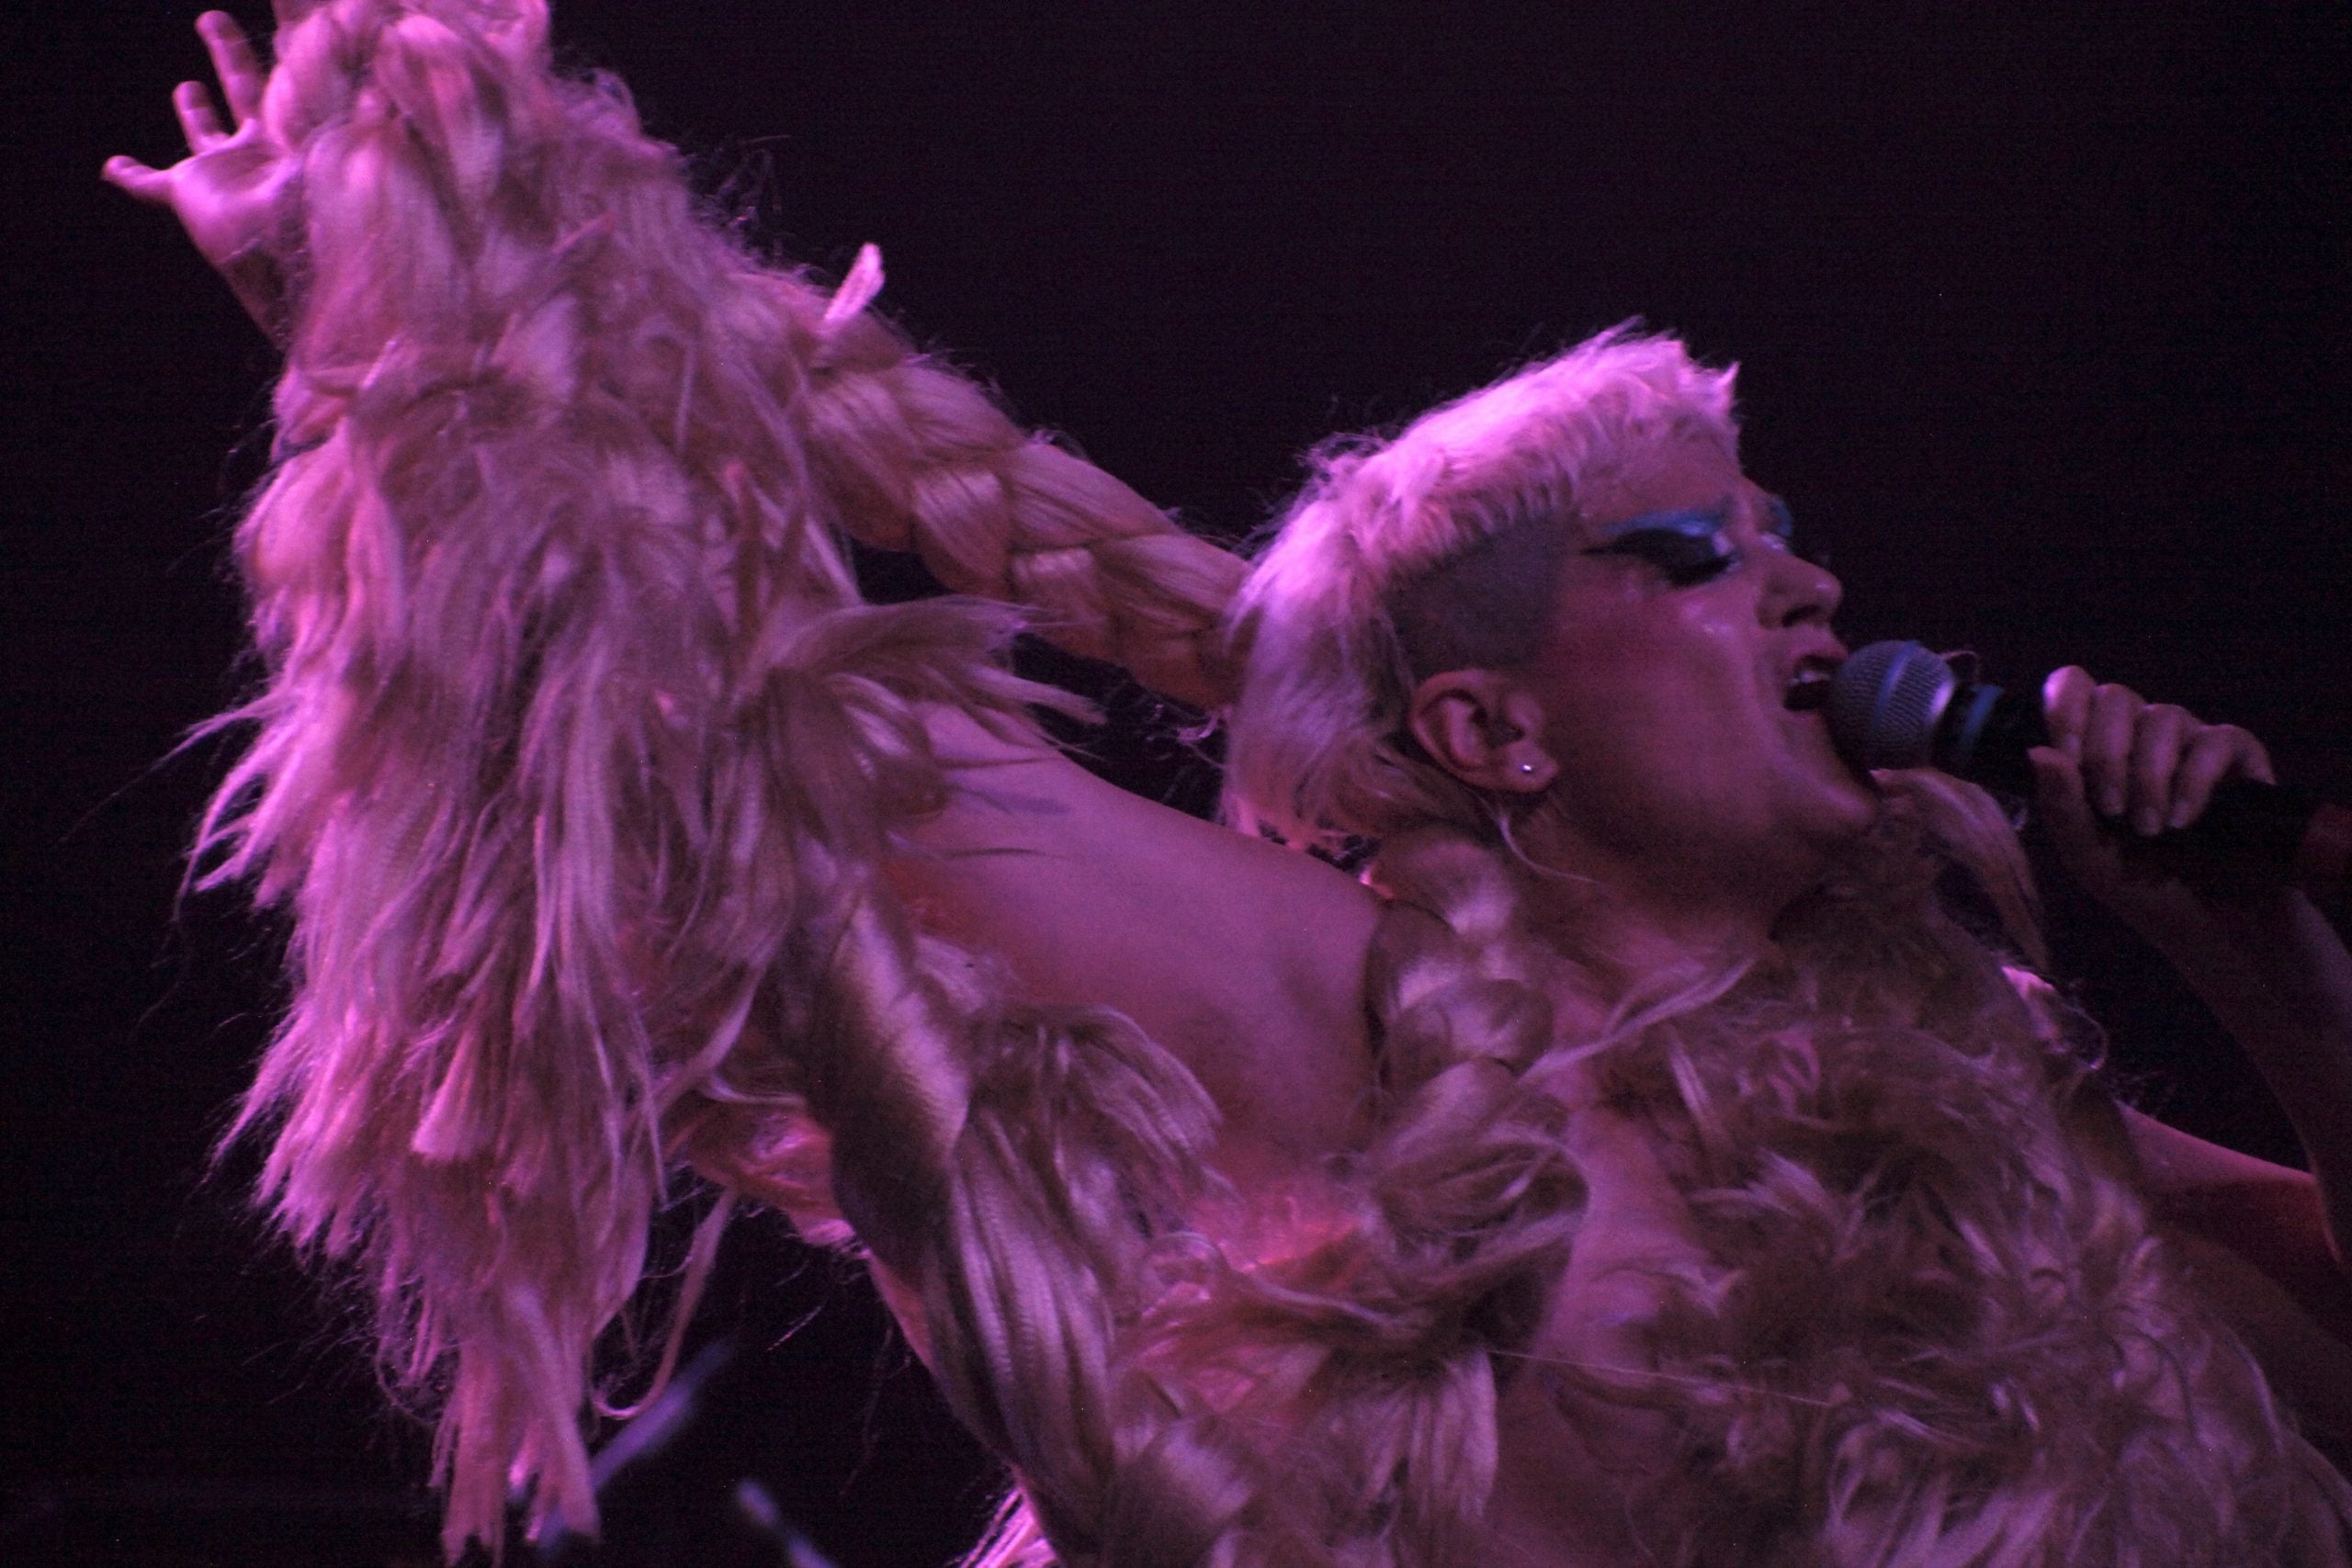 The Canadian singer, electronic musician and songwriter Peaches